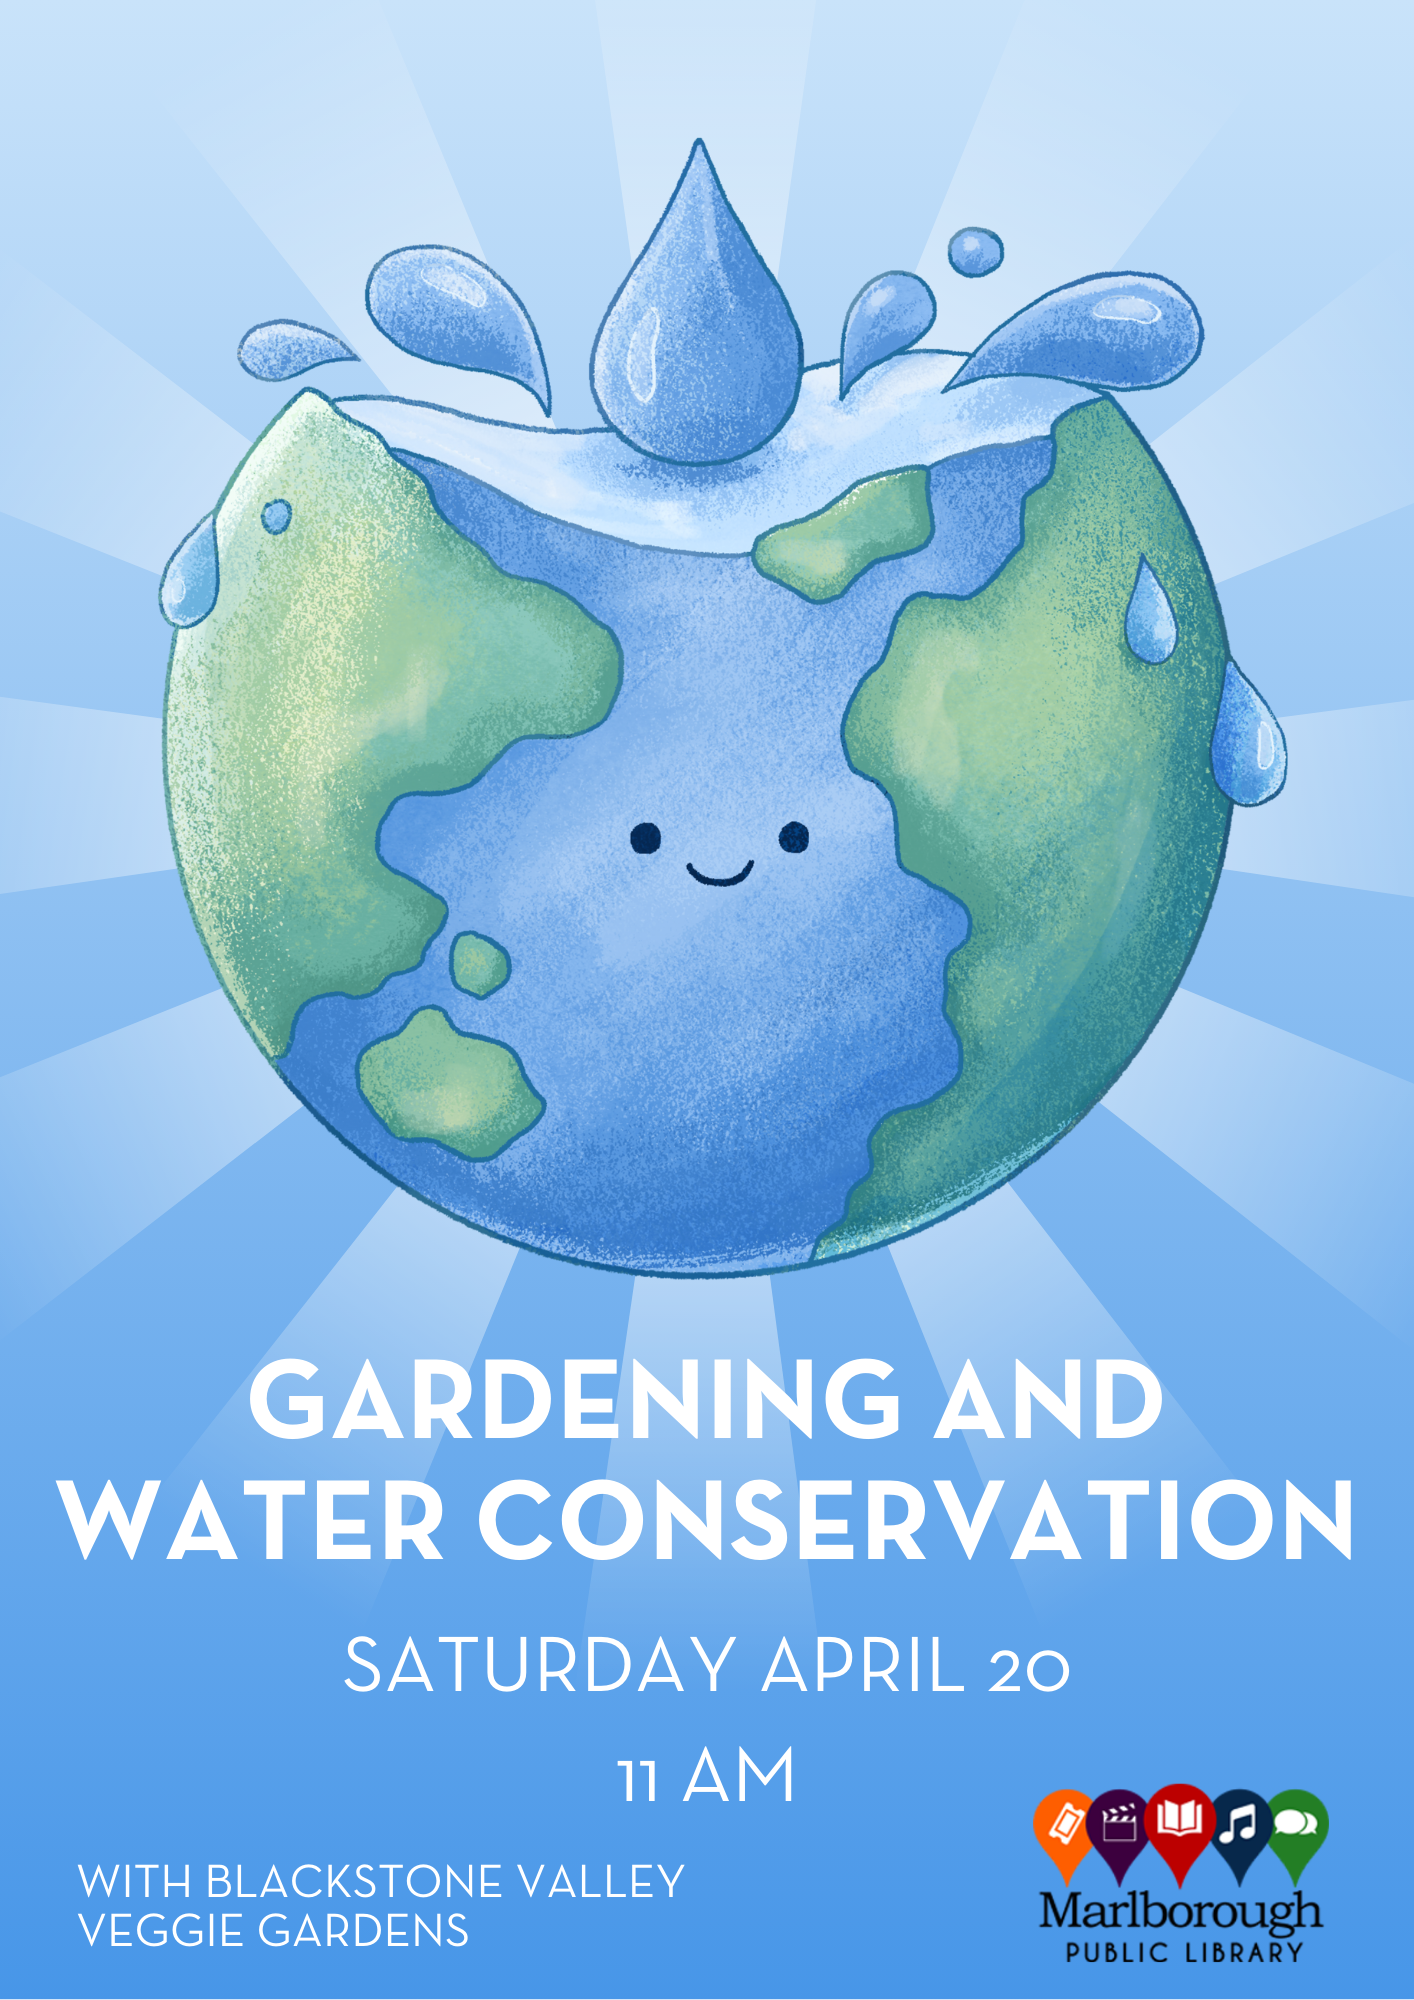 The presentation "Gardening and water conservation" by Blackstone Valley Veggie Gardens will happen at Marlborough Public Library on Saturday 4/20 at 11:00 AM in the Grice Community Room. All ages are welcome! 